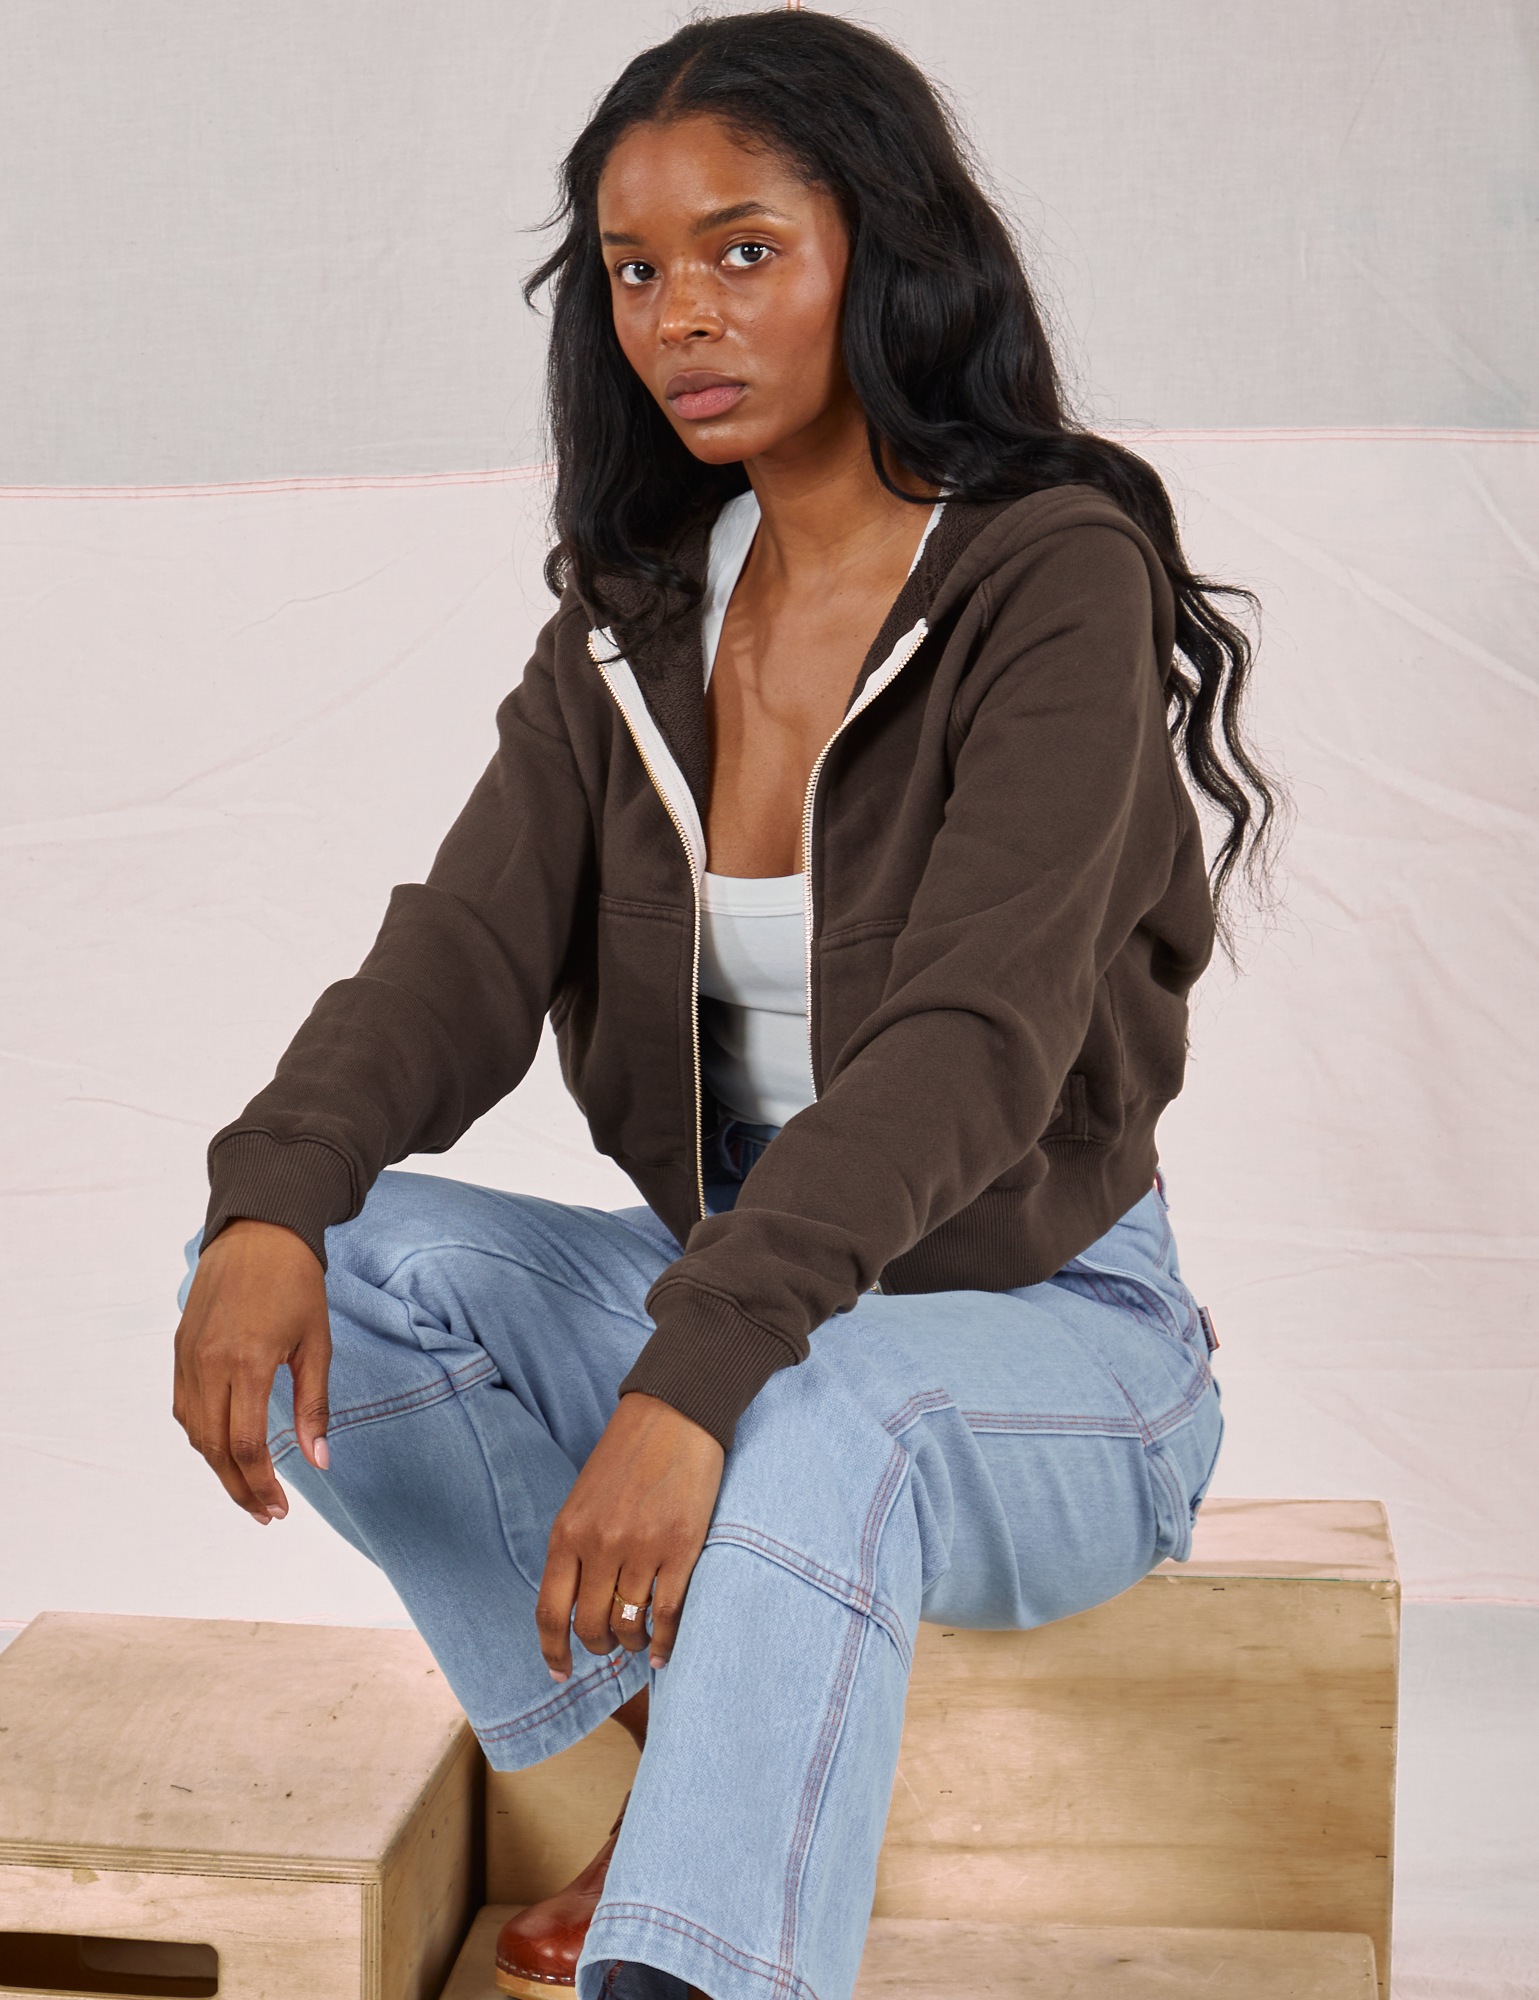 Kandia is wearing Cropped Zip Hoodie in Espresso Brown and light wash Carpenter Jeans